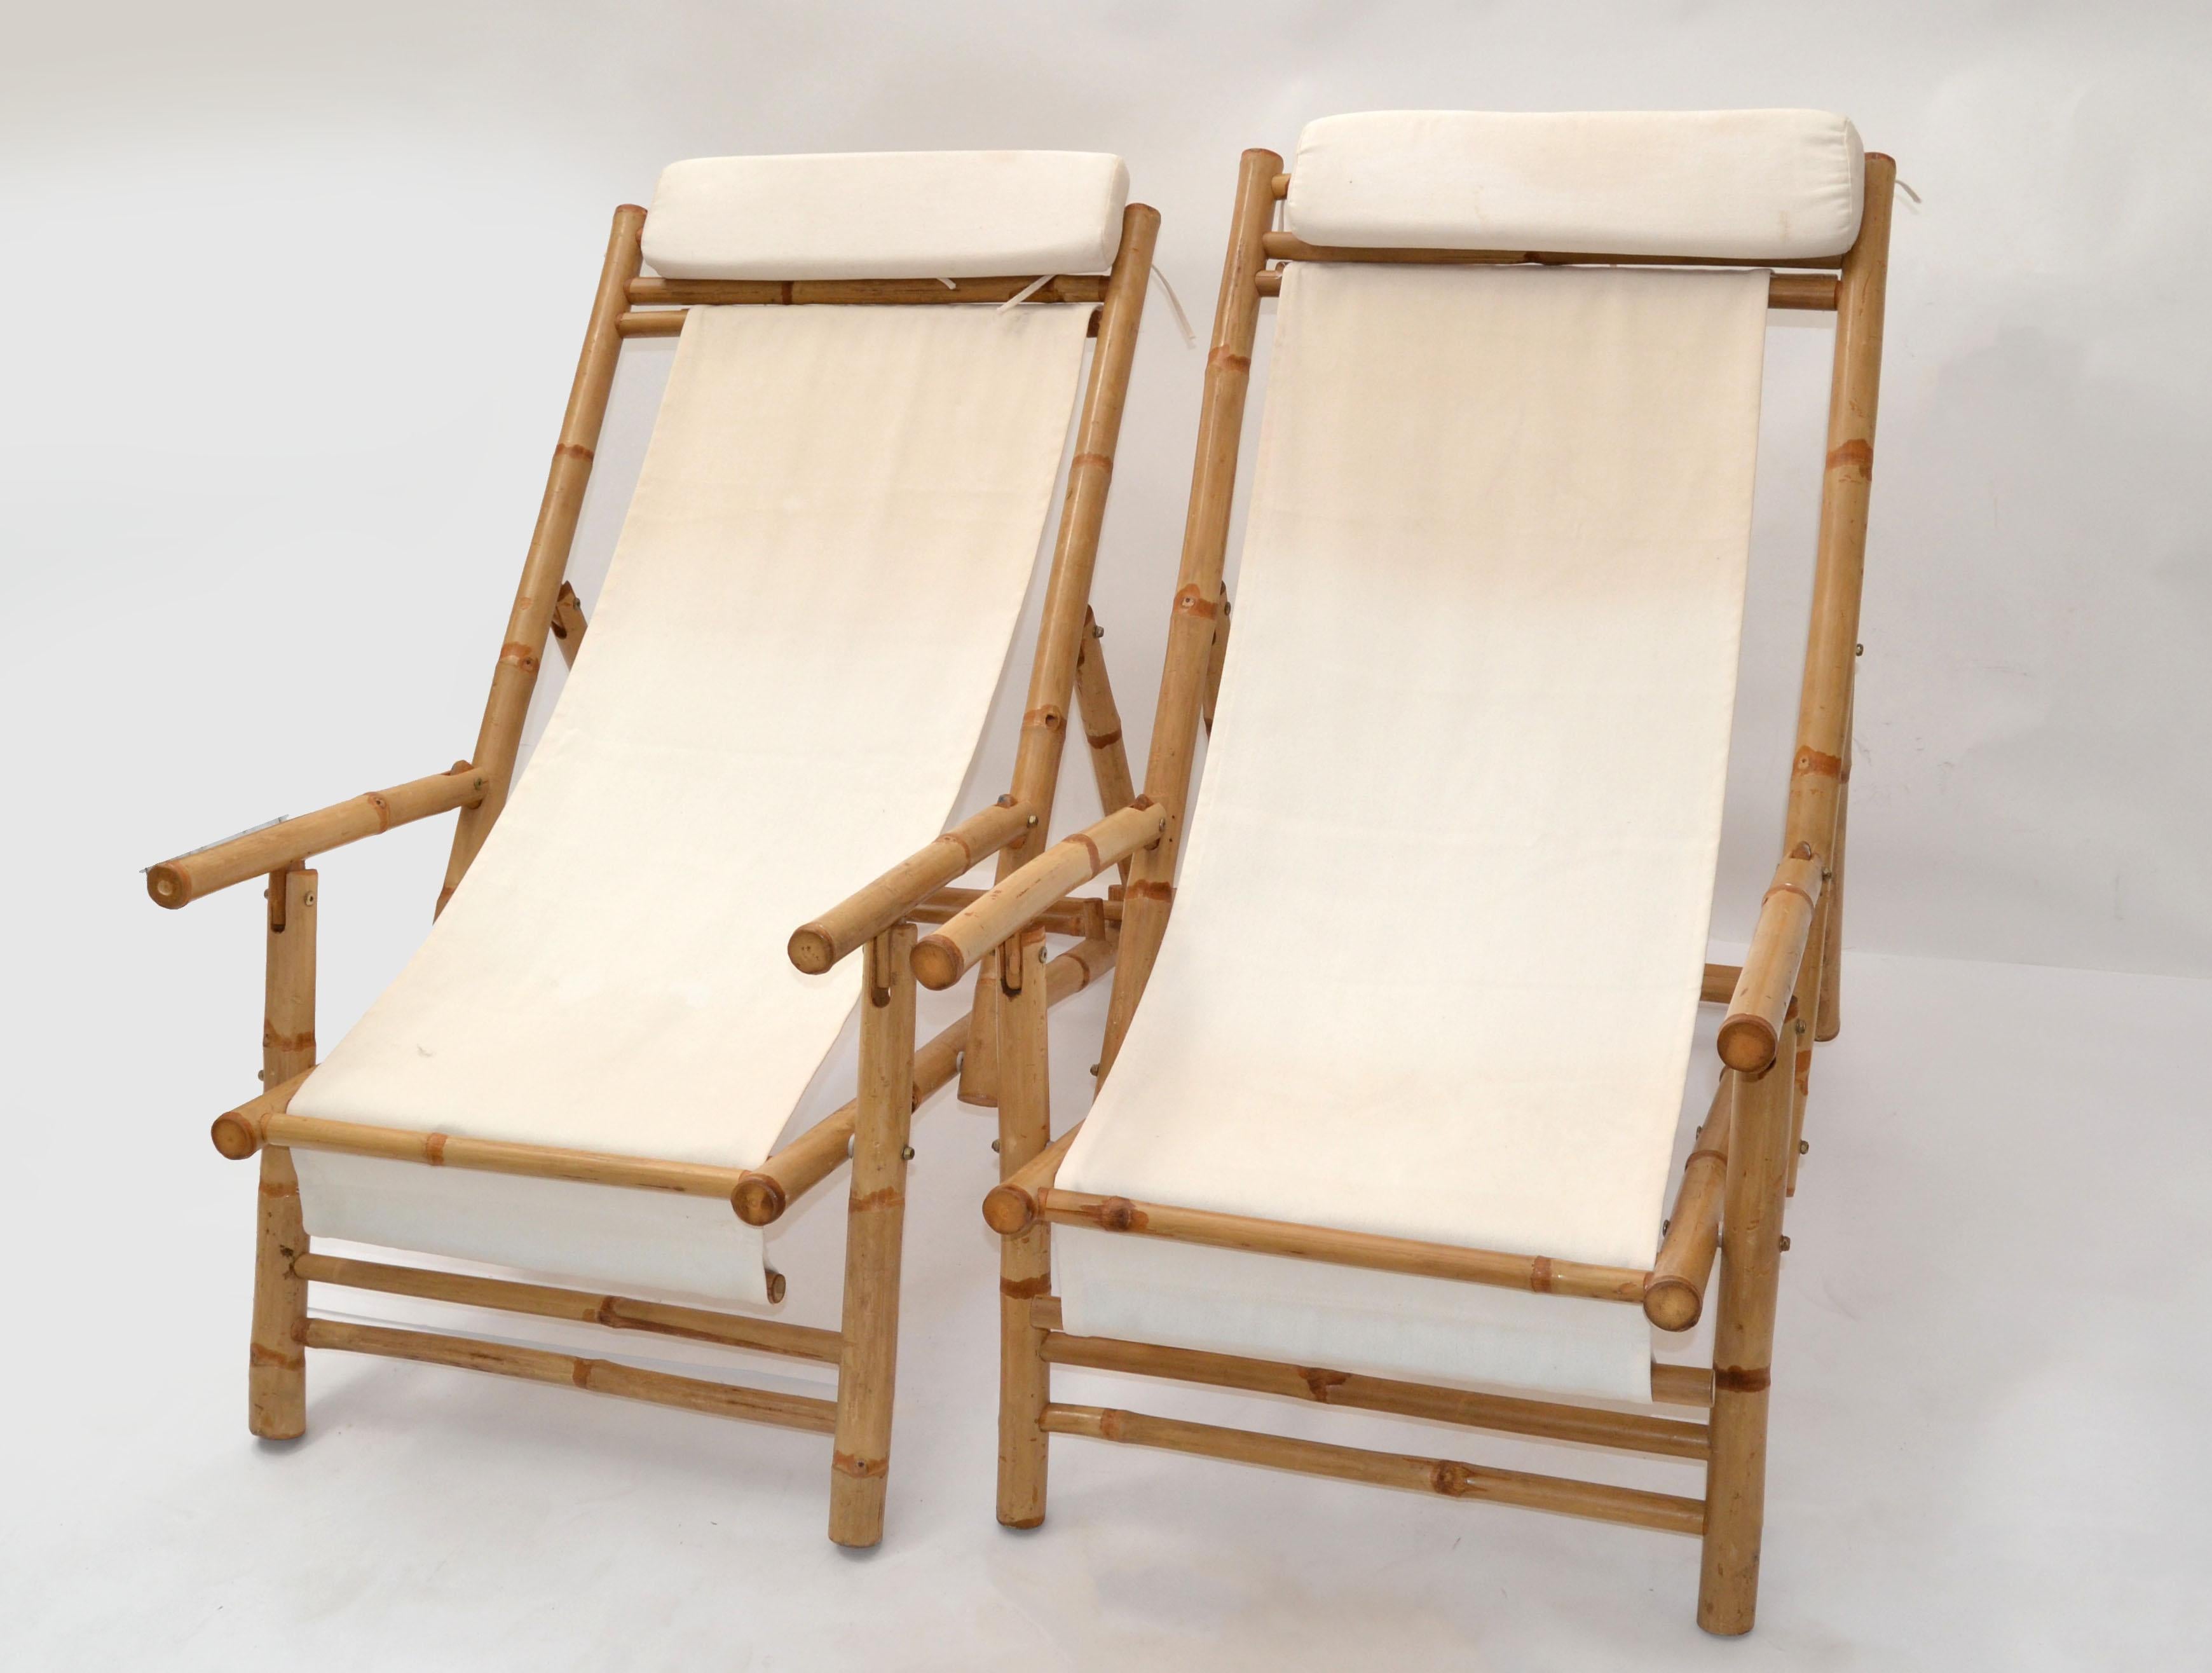 Pair of Vintage Bamboo, Brass & Linen Fabric Folding Lounge Chairs, 1970 For Sale 8